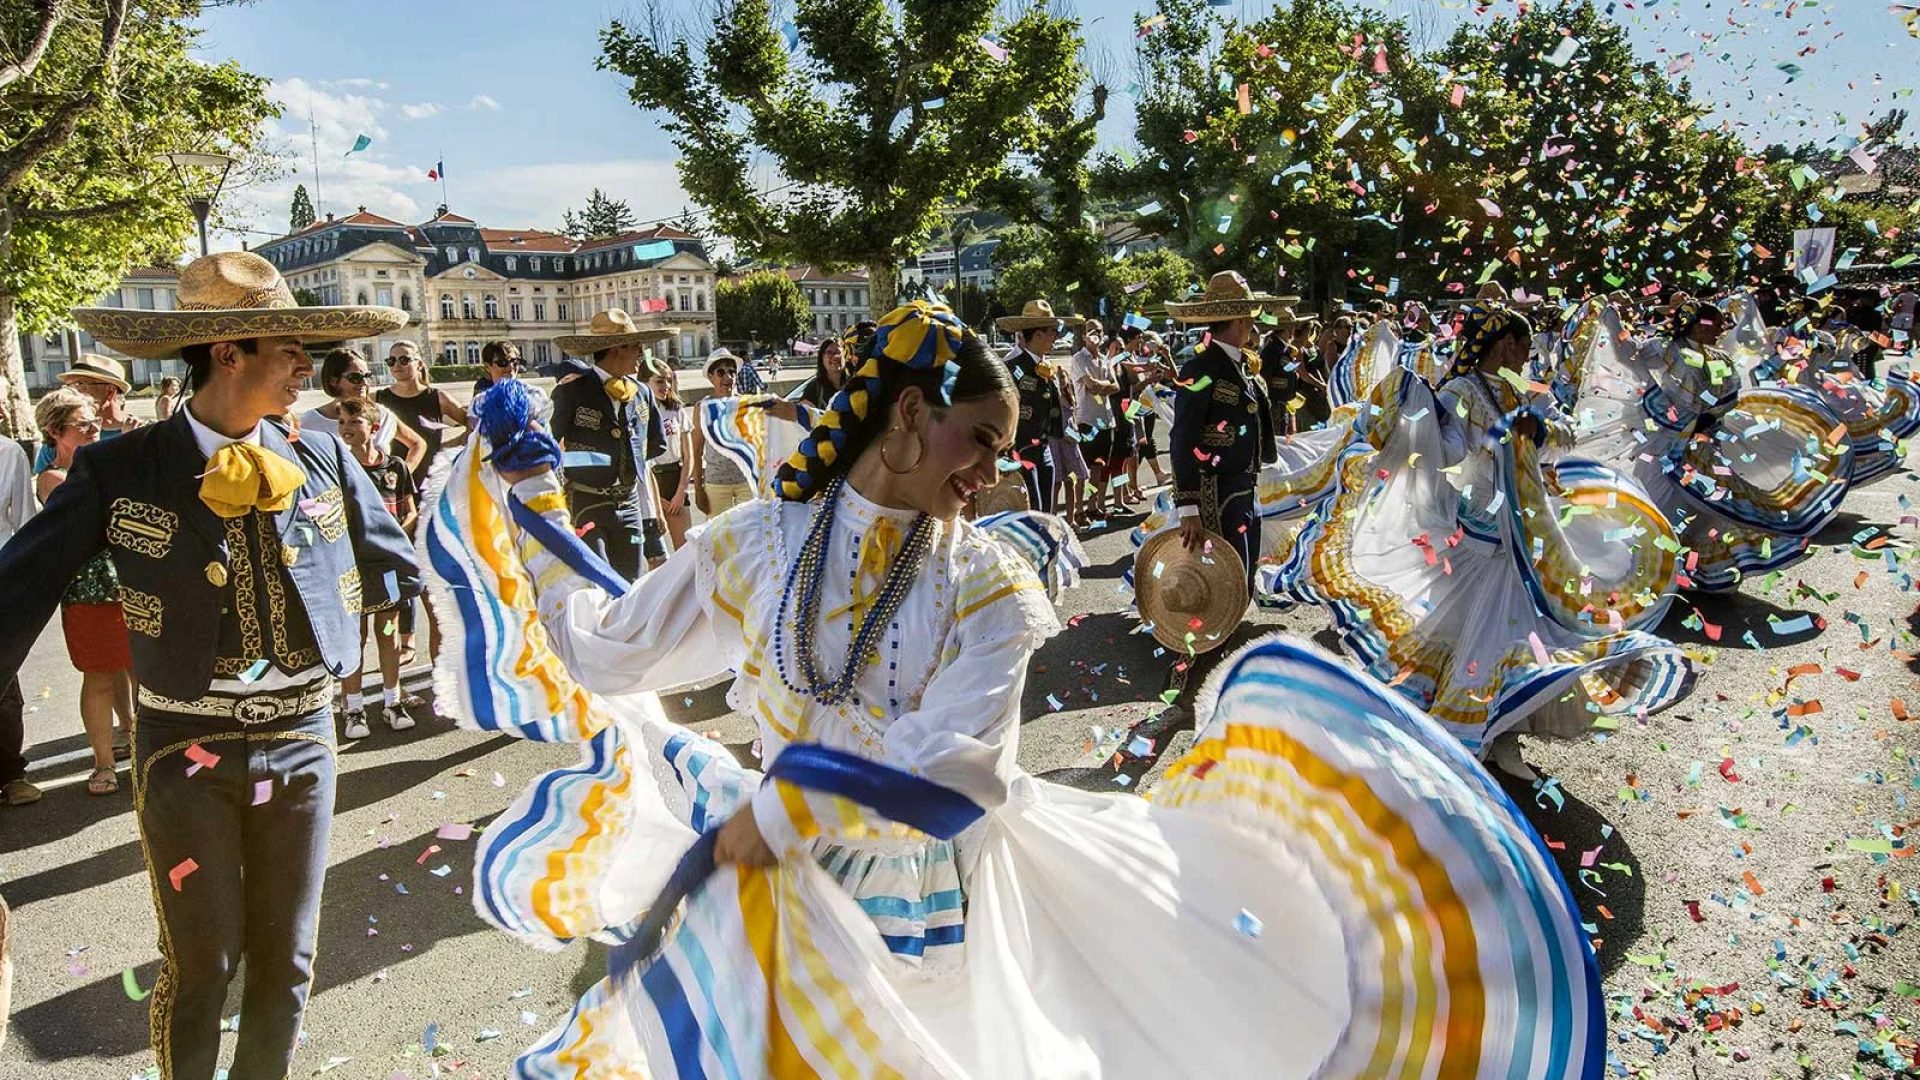 A group of Hispanic folk dancers perform in a street in Le Puy-en-Velay for the Interfolk festival in Haute-Loire, Auvergne